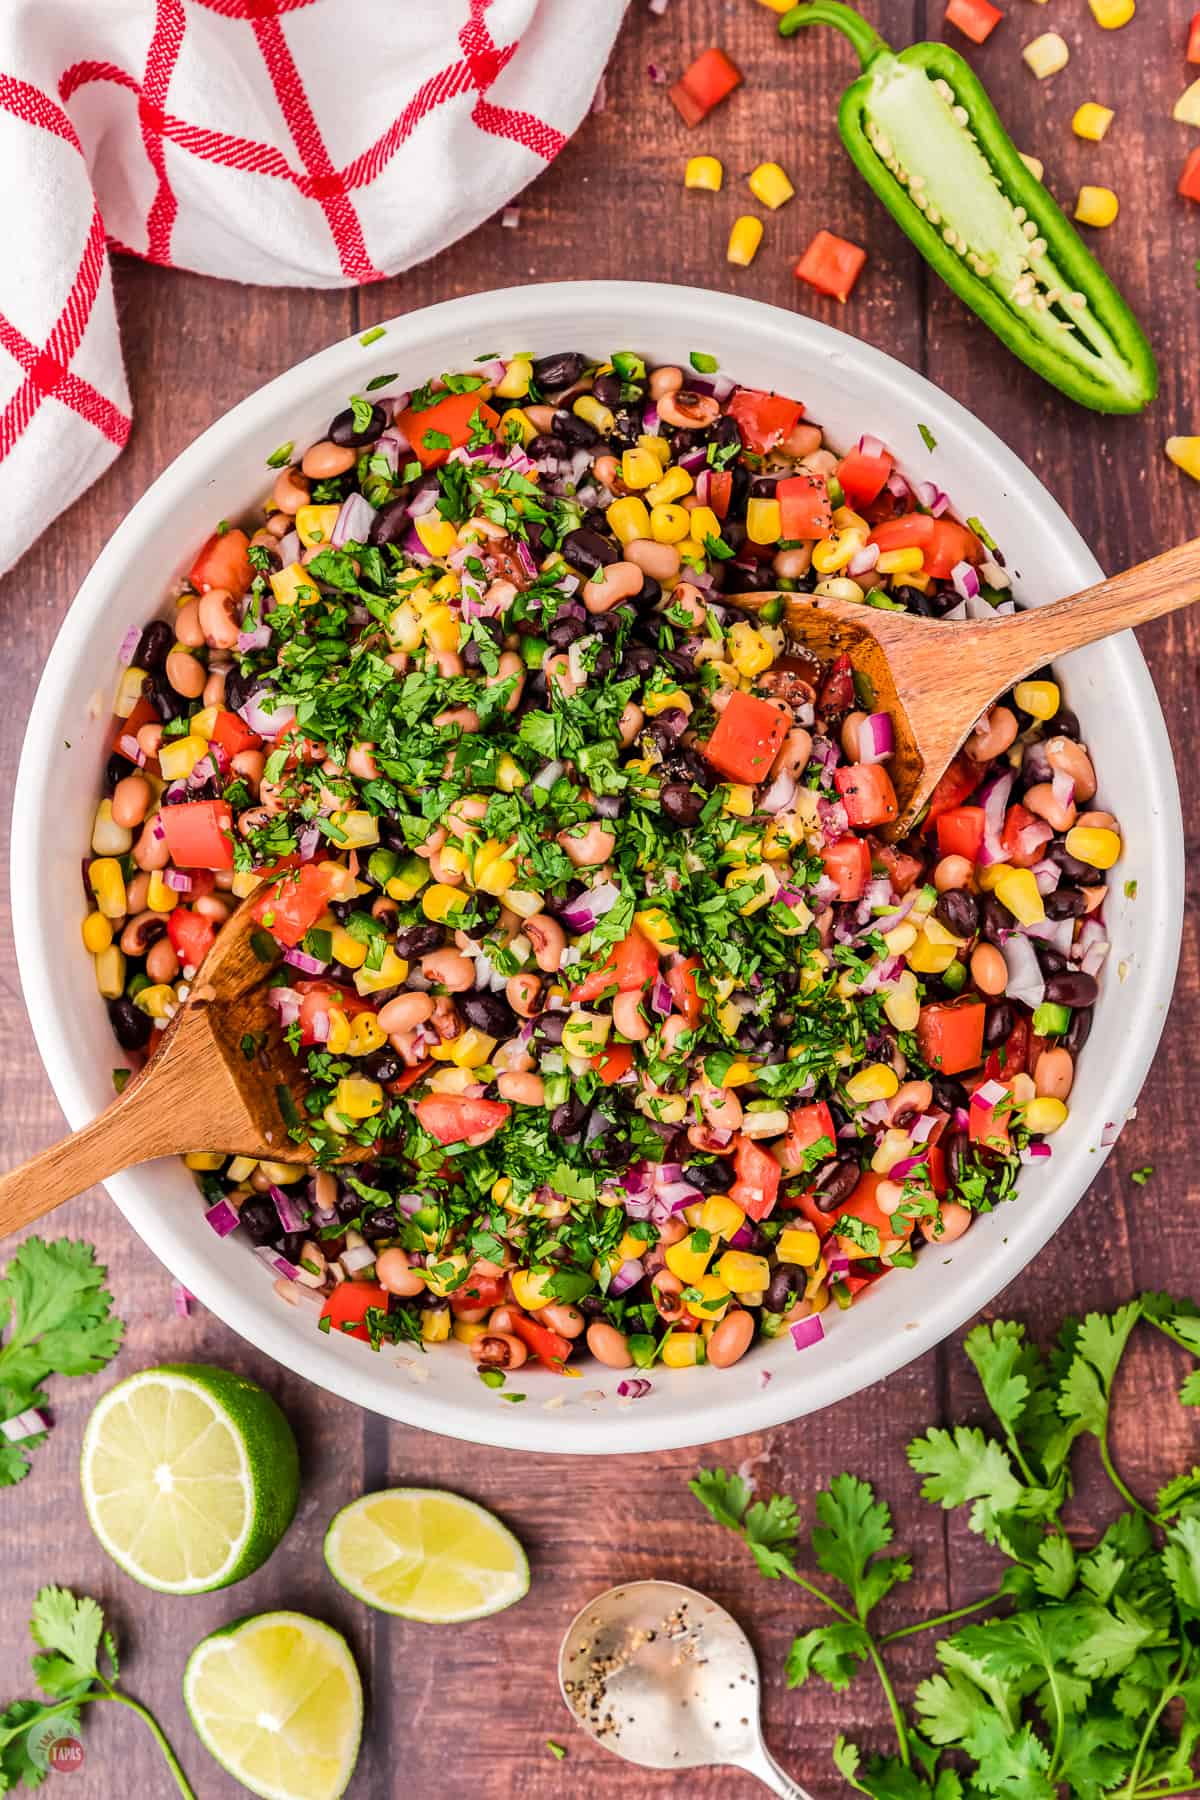 Top view of a large white bowl filled with cowboy caviar salad with two wooden serving utensils in it on either side. There are also some limes, cilantro and a jalapeno on the table next to the bowl. 